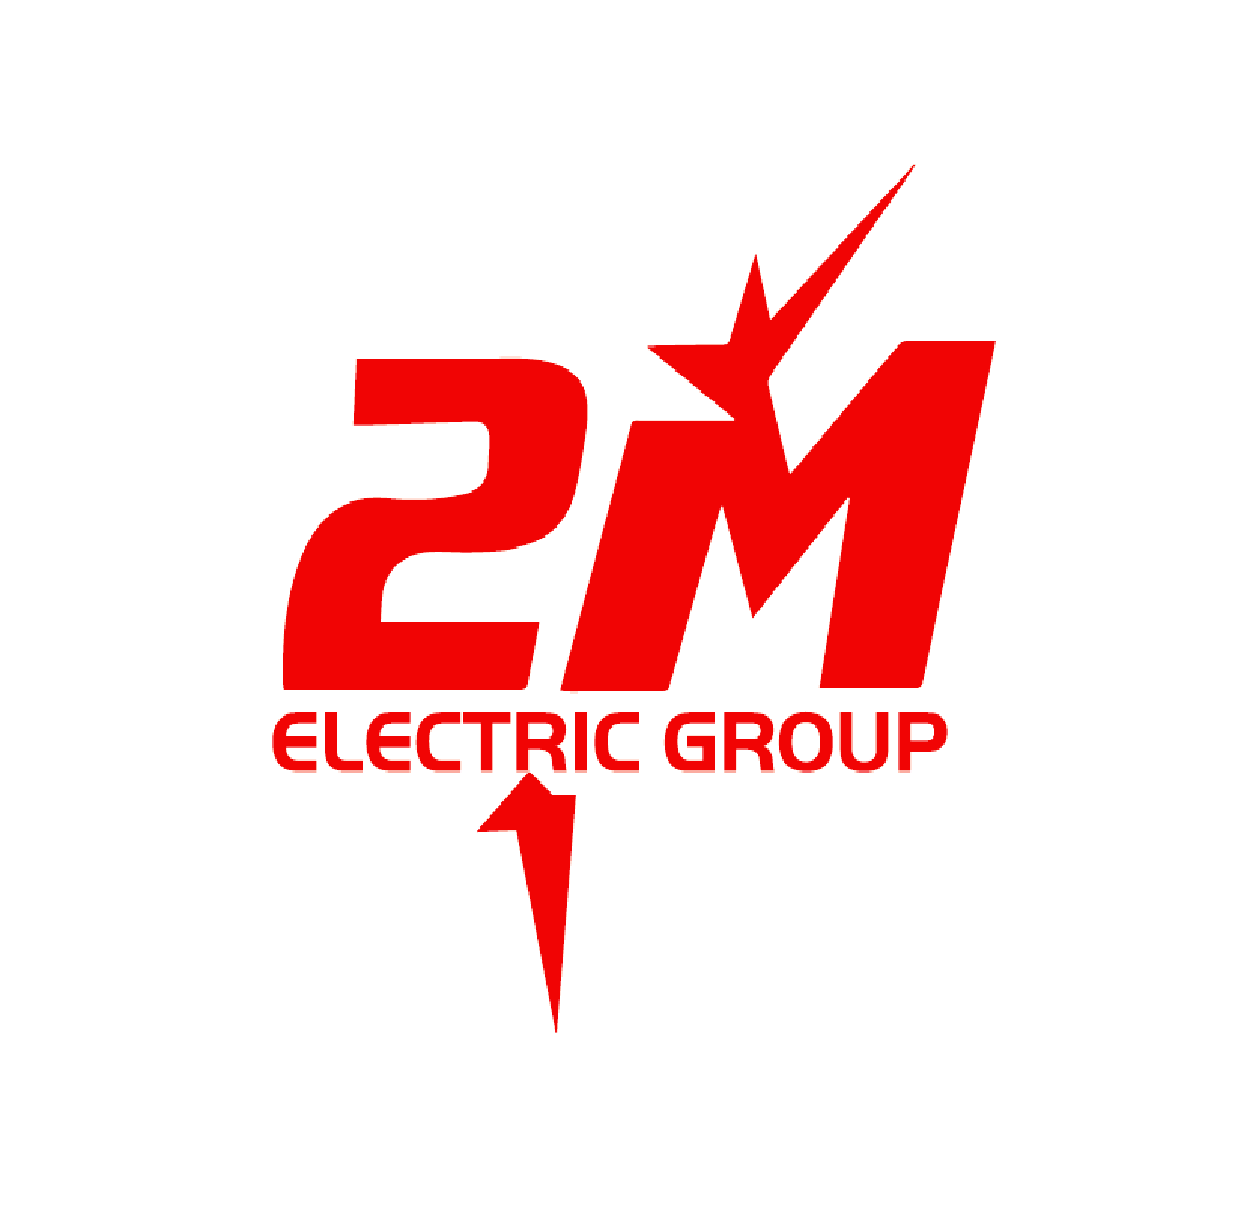 2M Electric Group